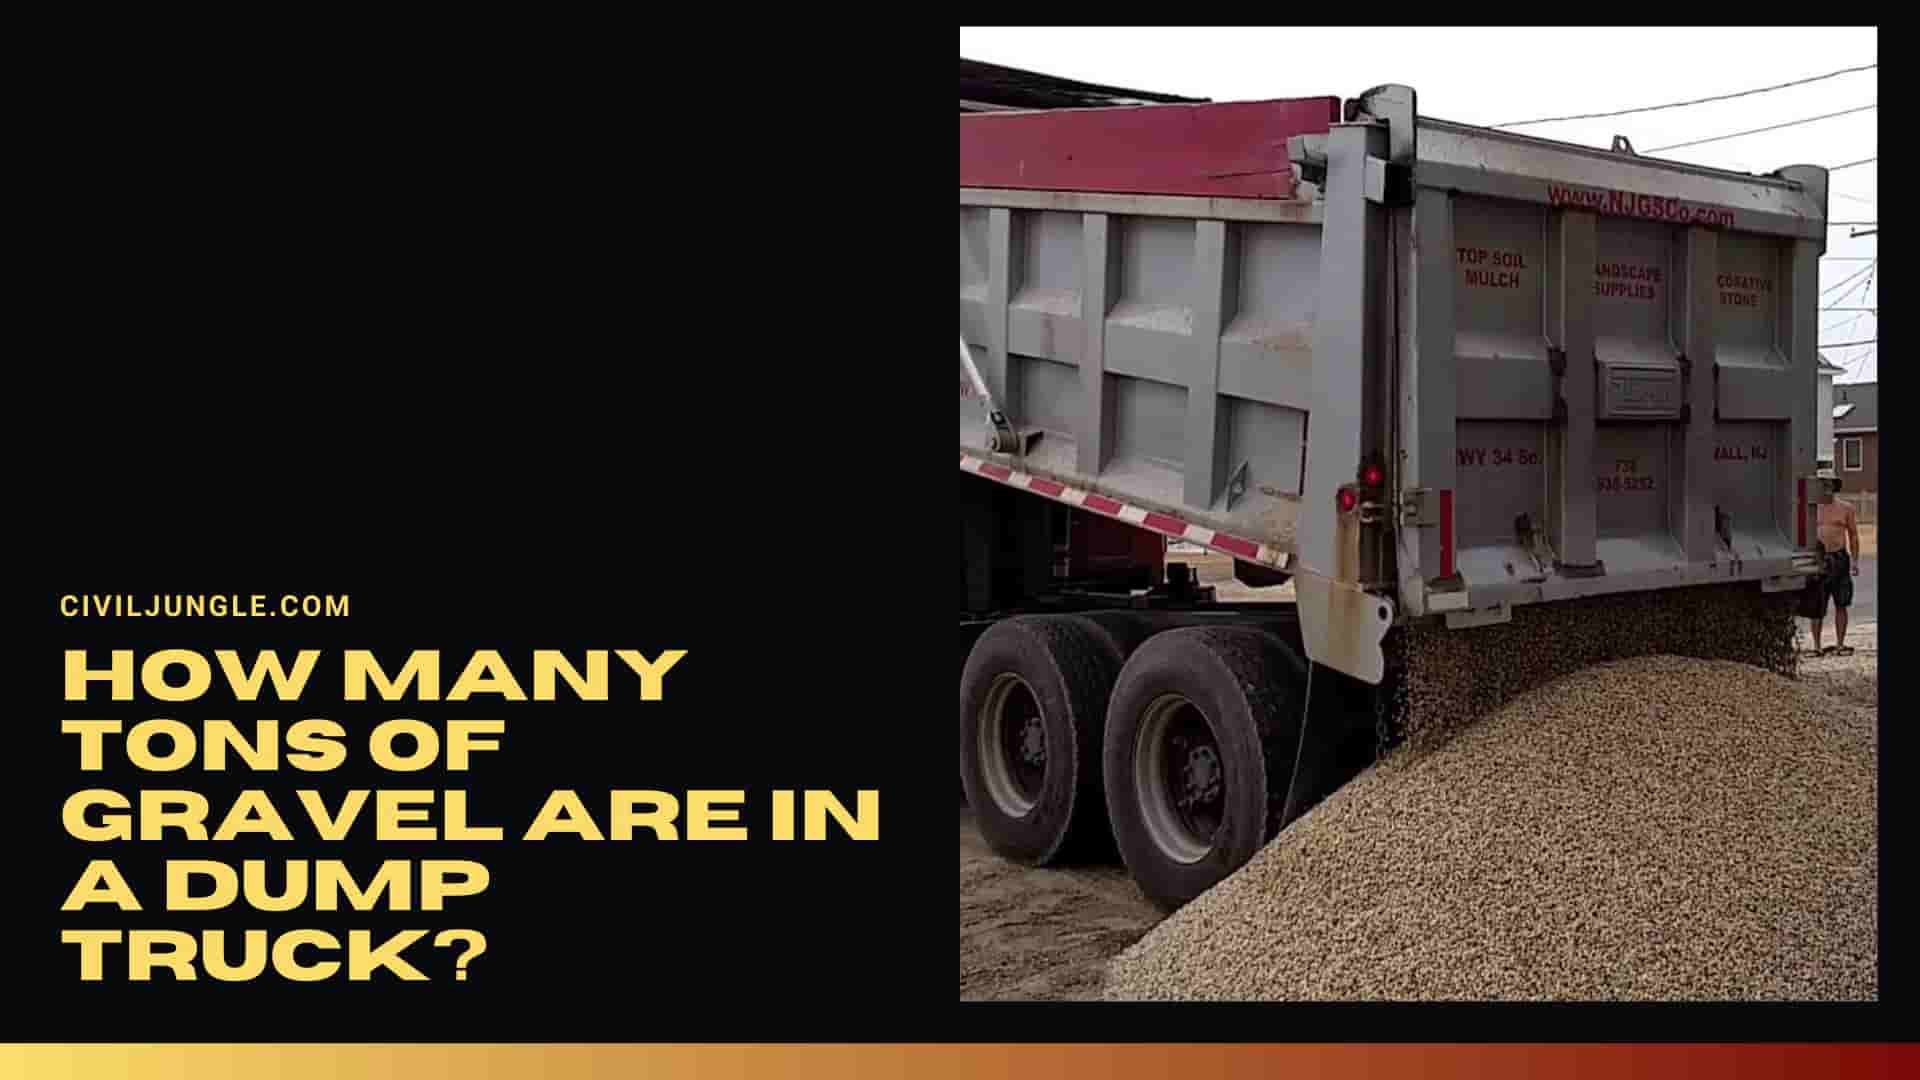 How Many Tons of Gravel Are in a Dump Truck?